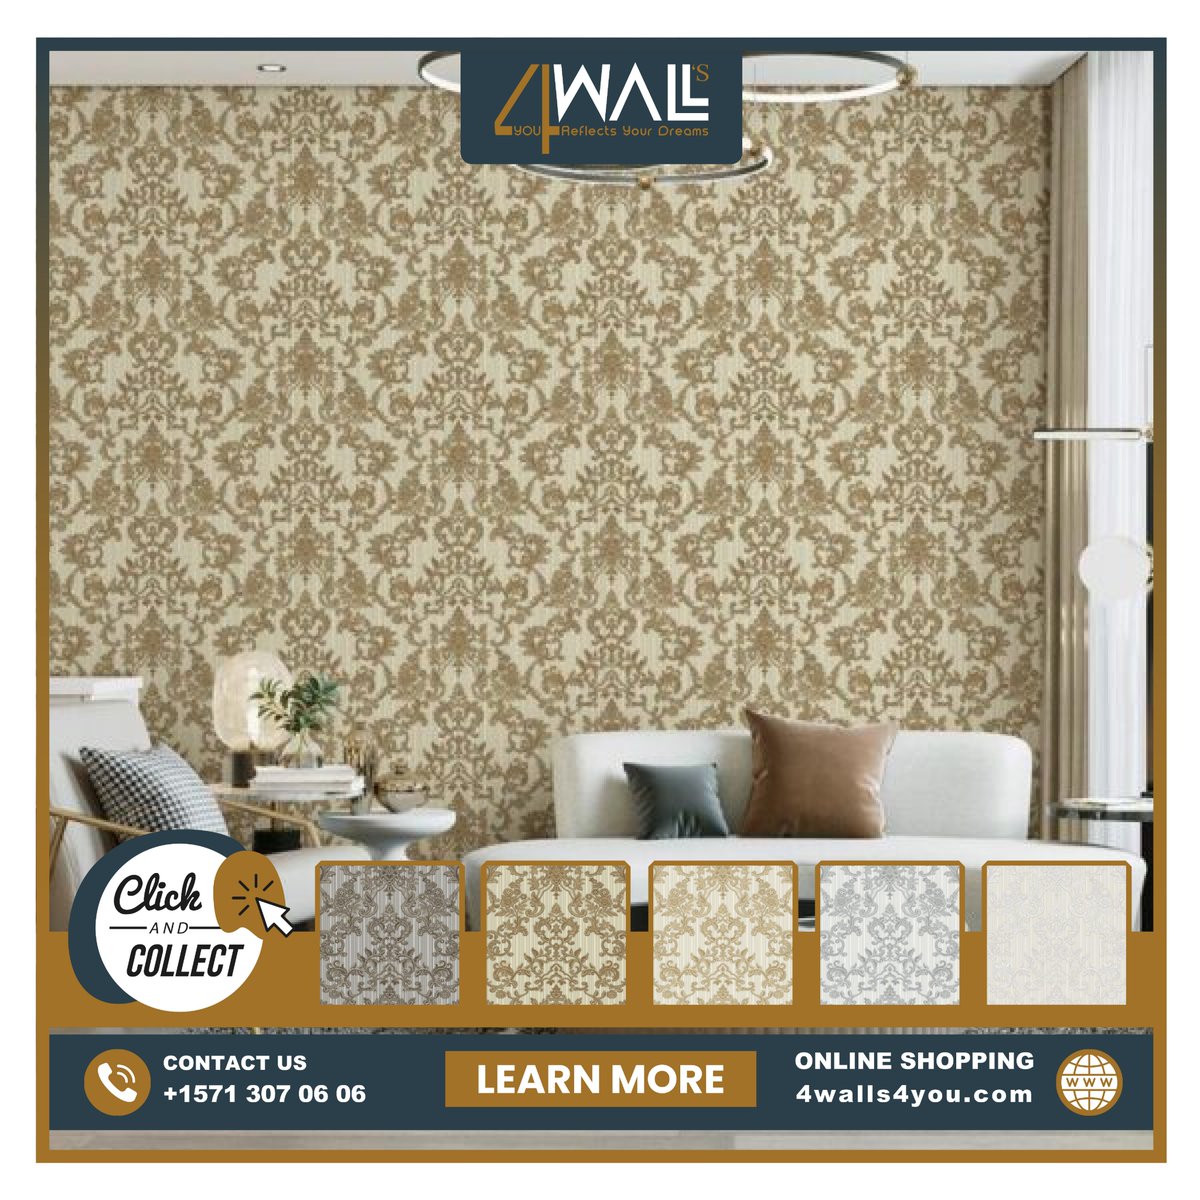 1305 Series | Floral Damask Wallpaper
We believe that every design is unique and has its history and special individual charm.
#wallpapersale #onlinewallpapersale #wallpaperdiscount #wallpaperonlinestore #wallpaperforsale #wallpaperdecor #interiordecorating #homedecor